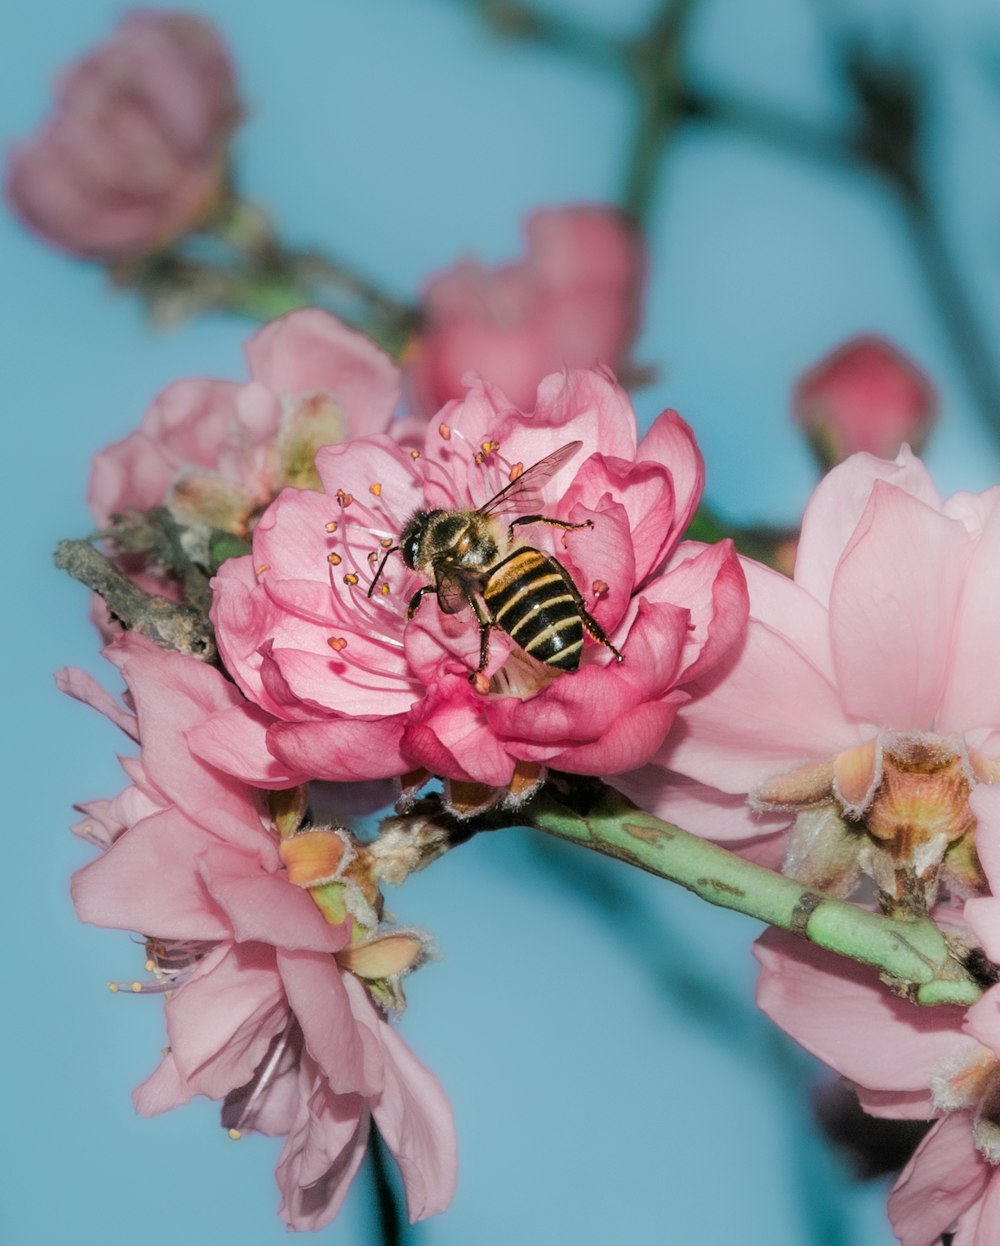 honeybee perched on pink flower in close up photography during daytime